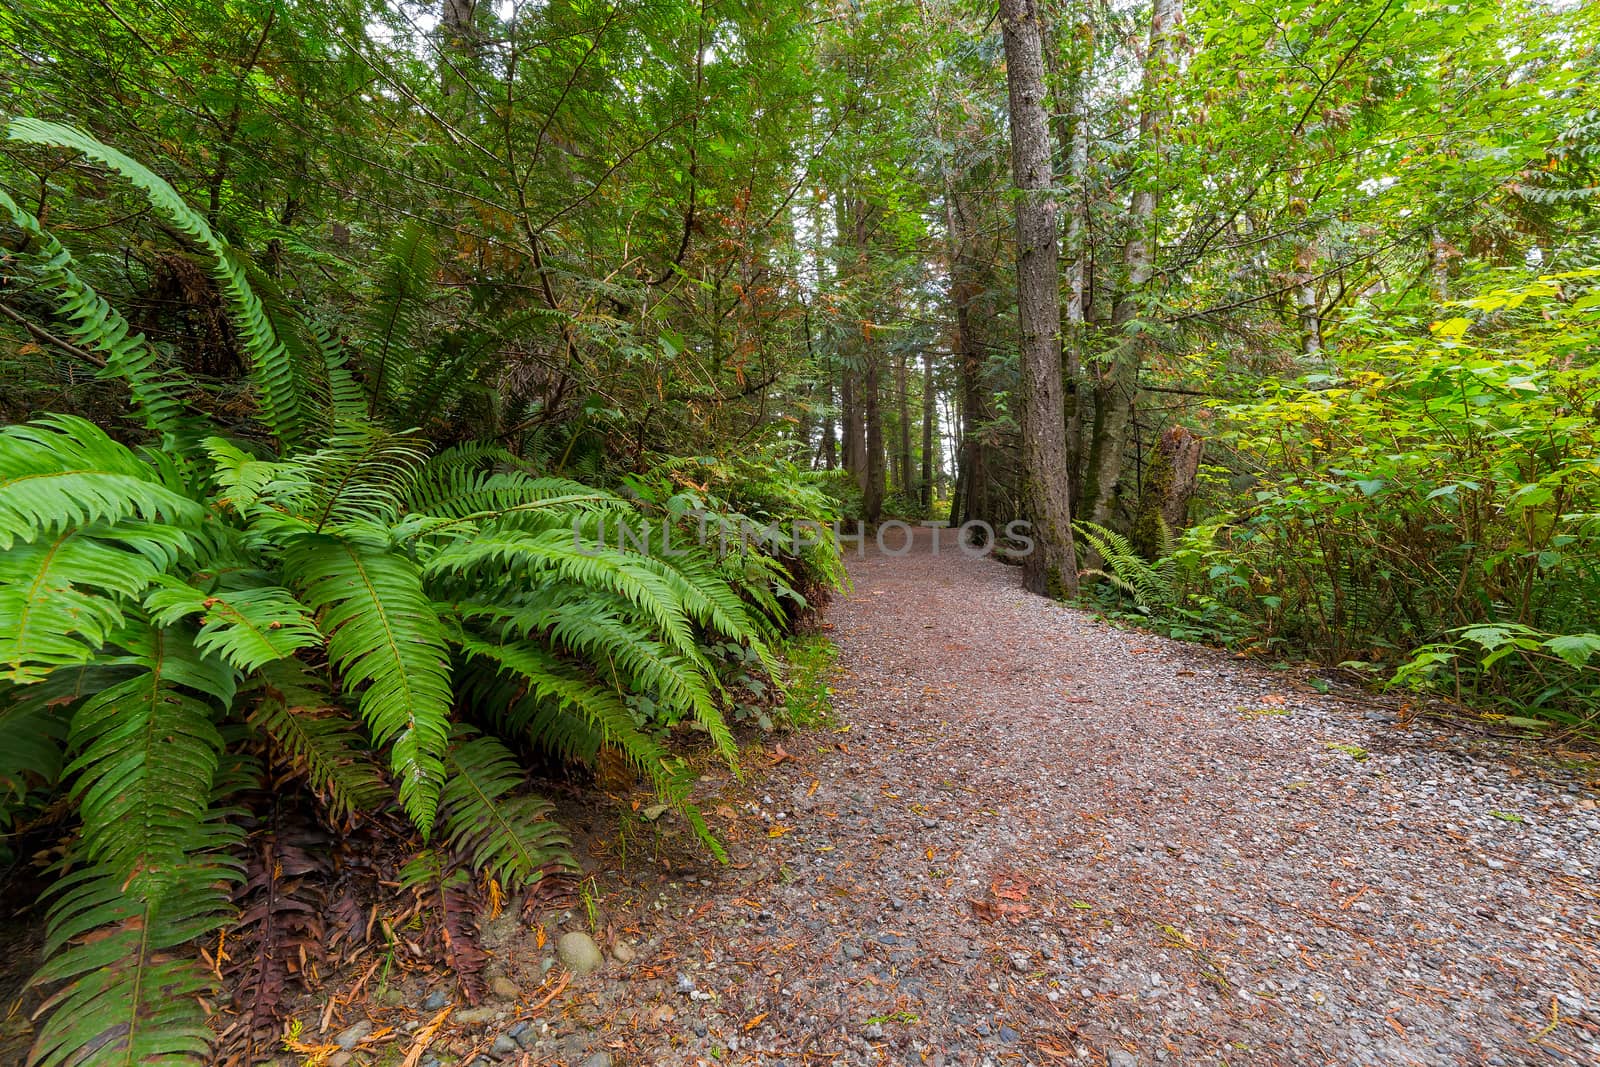 Hiking Trail in Whatcom Falls Park by jpldesigns